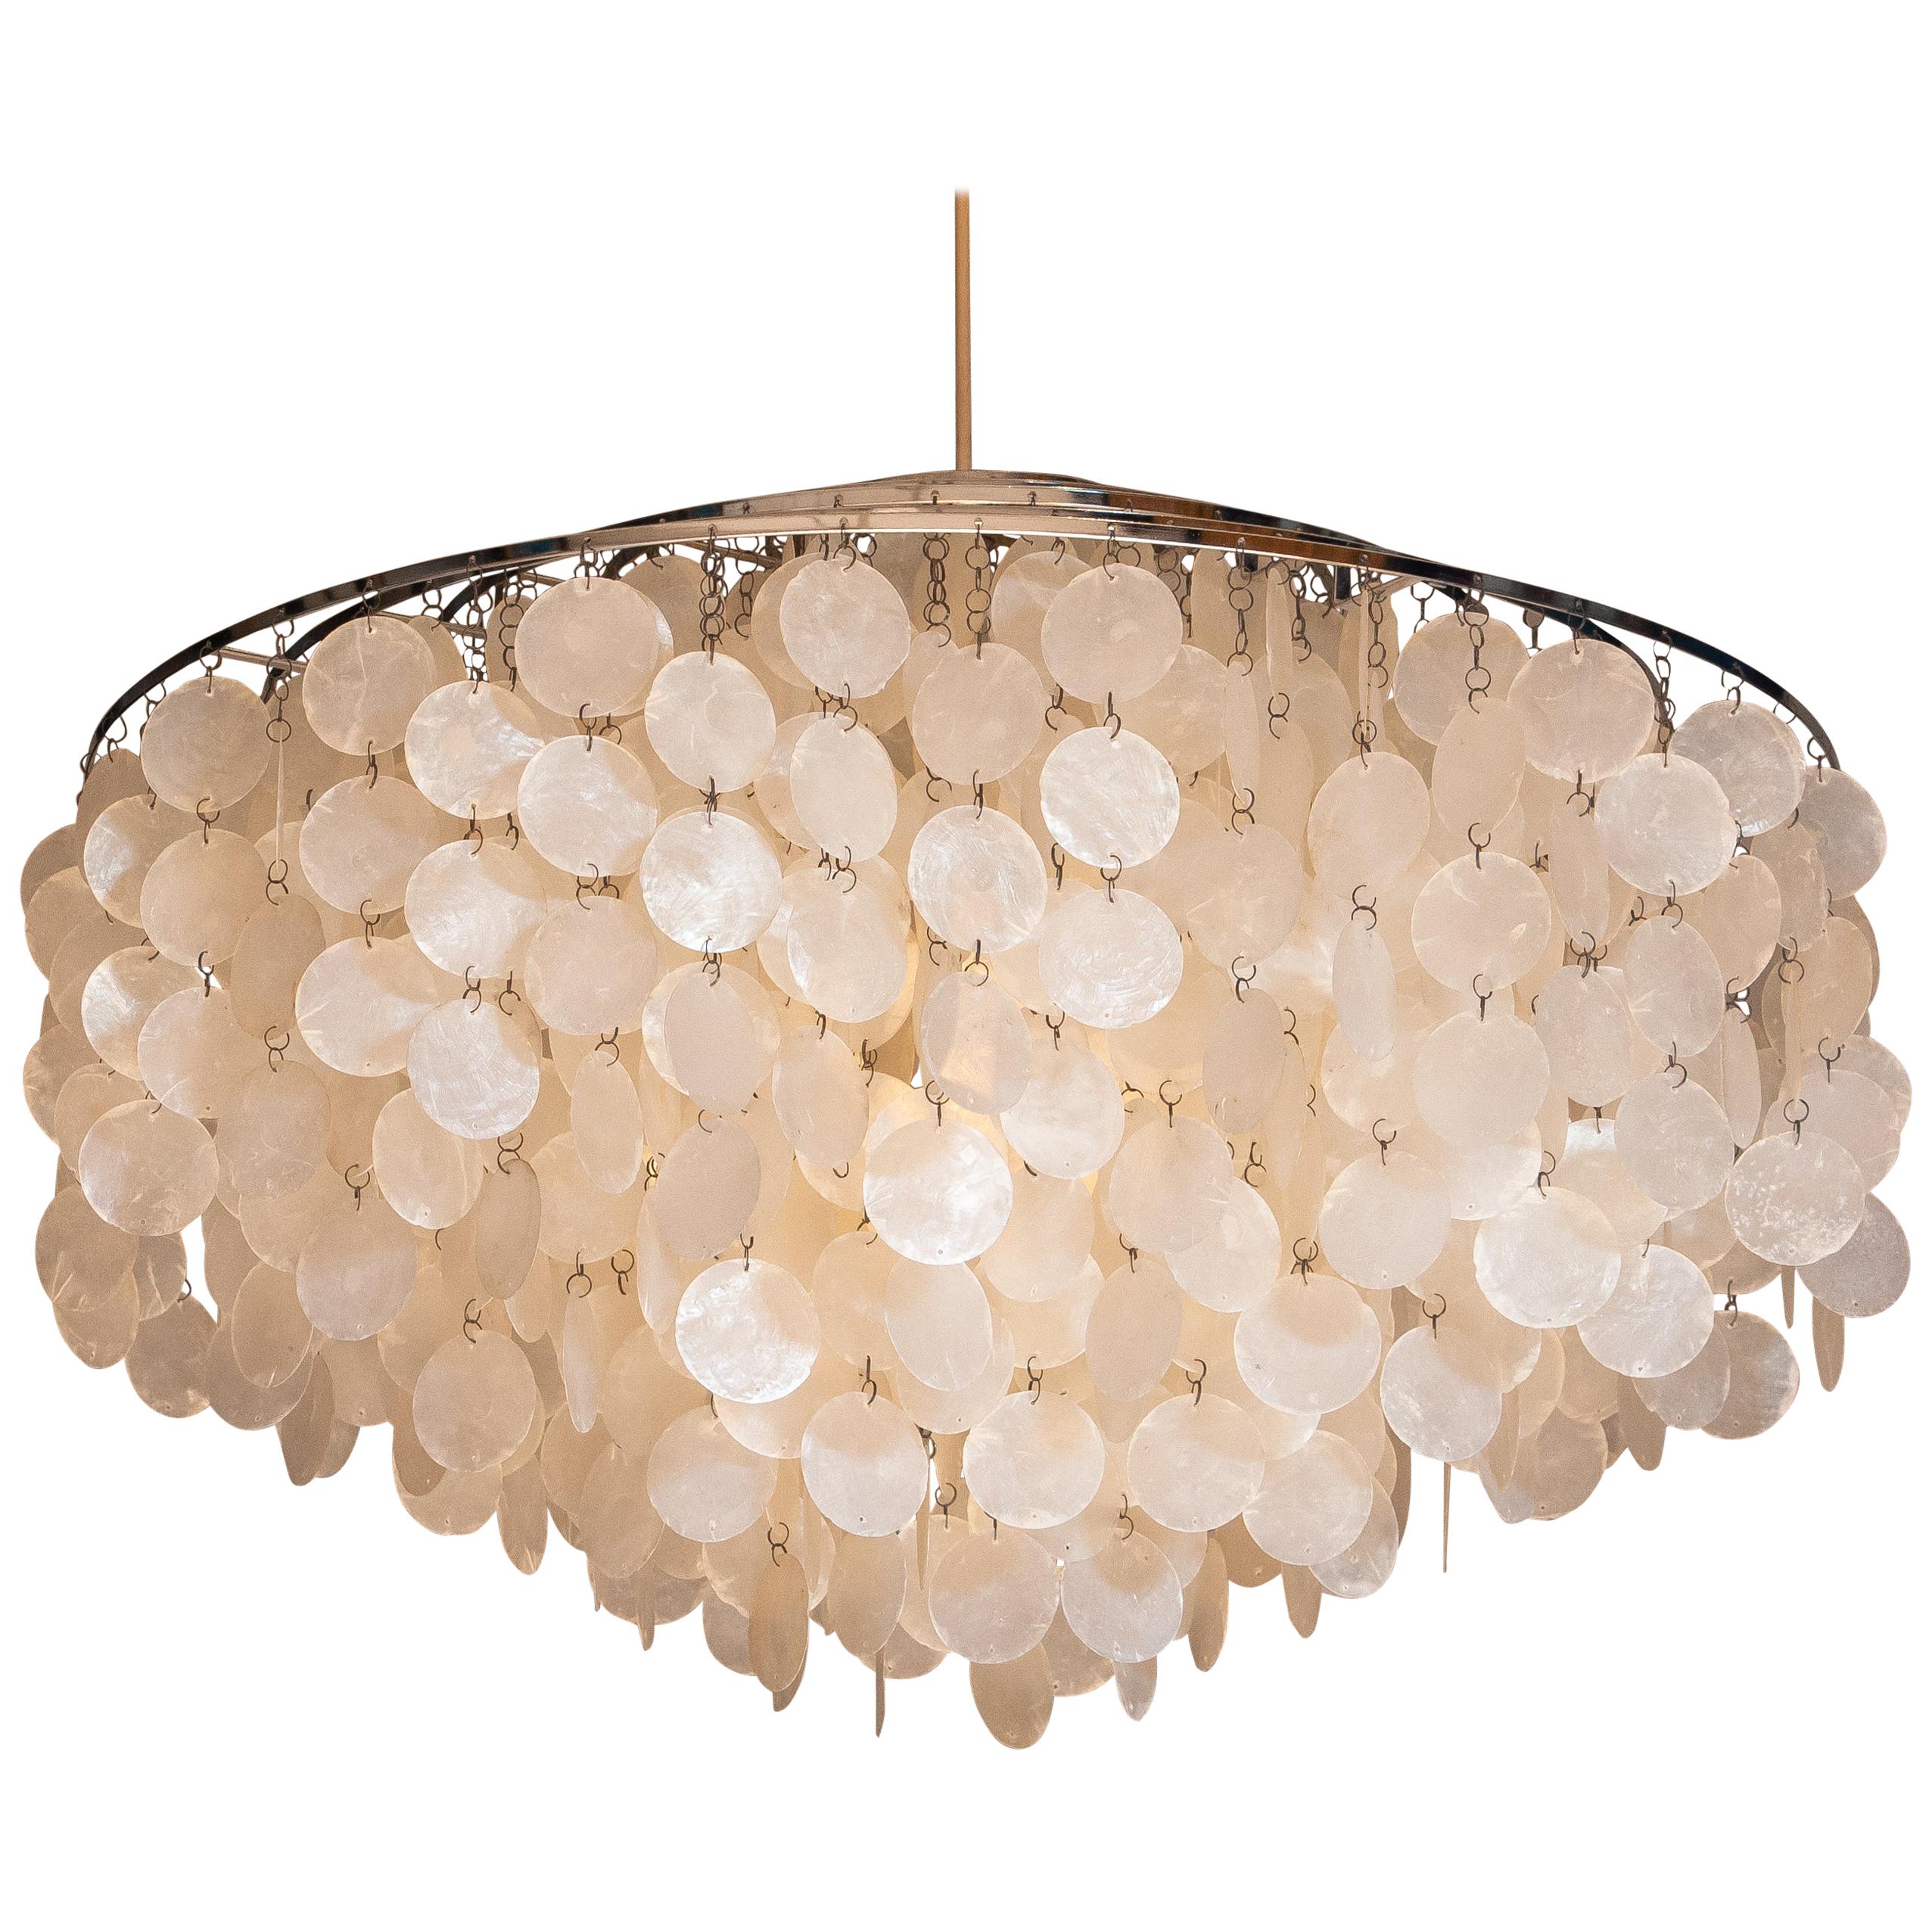 Beautiful and complete original extra large Capiz shell chandelier designed by Verner Panton for J. Luber Ag in Switzerland, 1964.
This extra large chandelier measures a diameter of 70cm. or 27.56